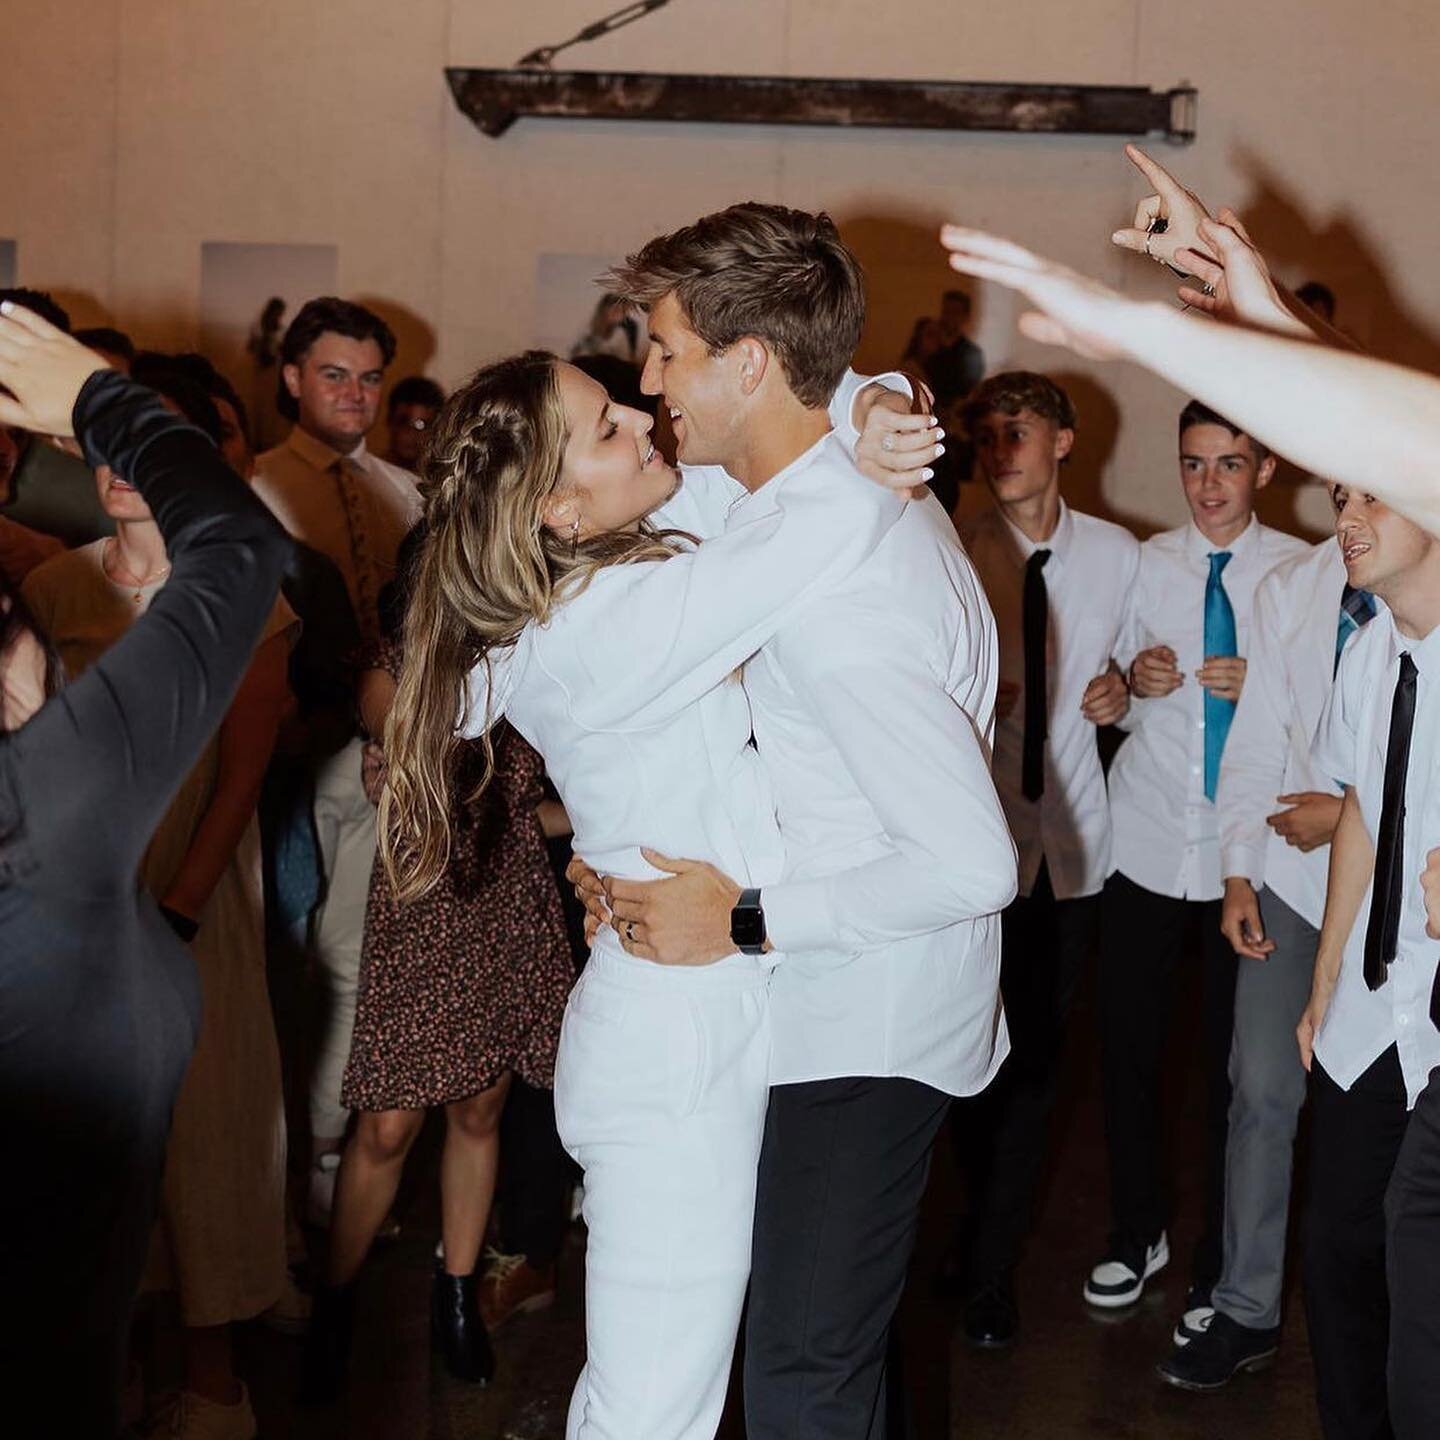 Channeling all of this fun energy into our weekend plans 🎉 keep wedding dance parties alive! 📸 @kaylamarieephotography